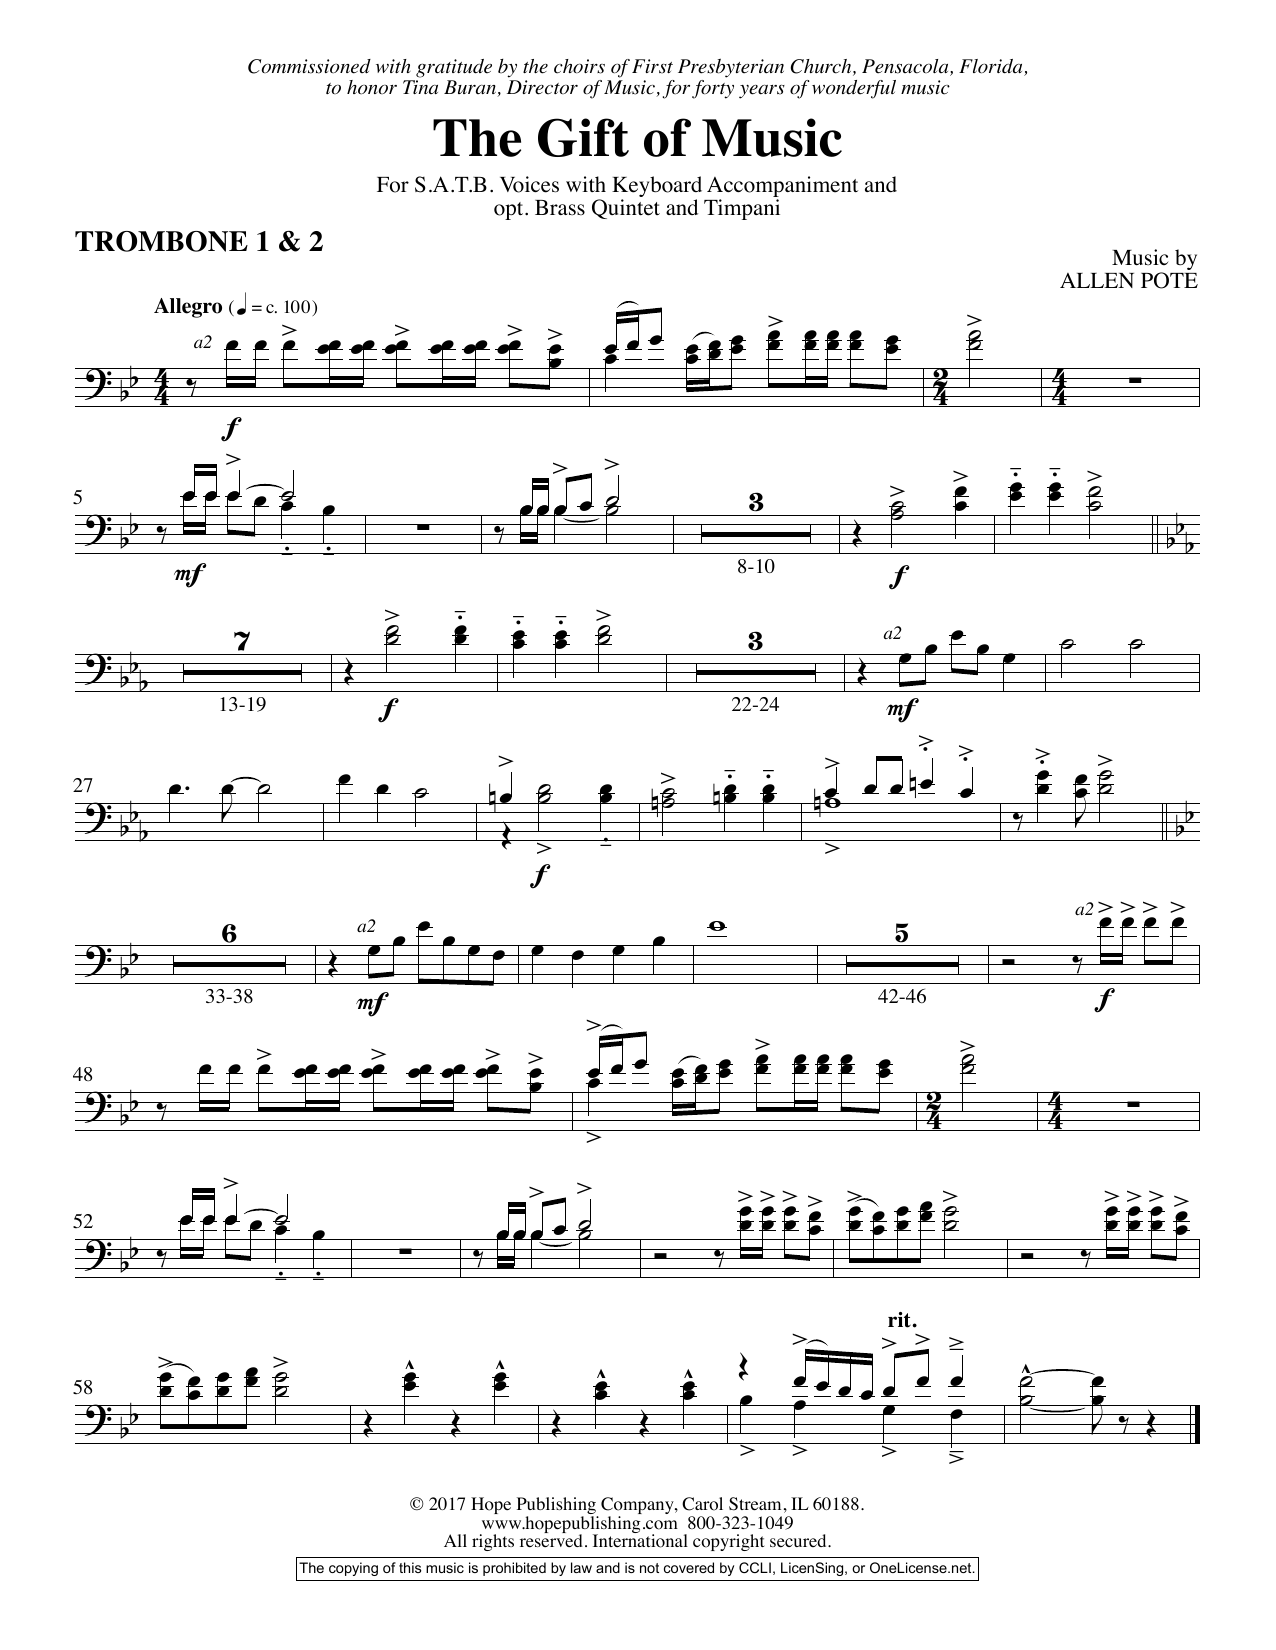 Download Allen Pote The Gift Of Music - Trombone 1 & 2 Sheet Music